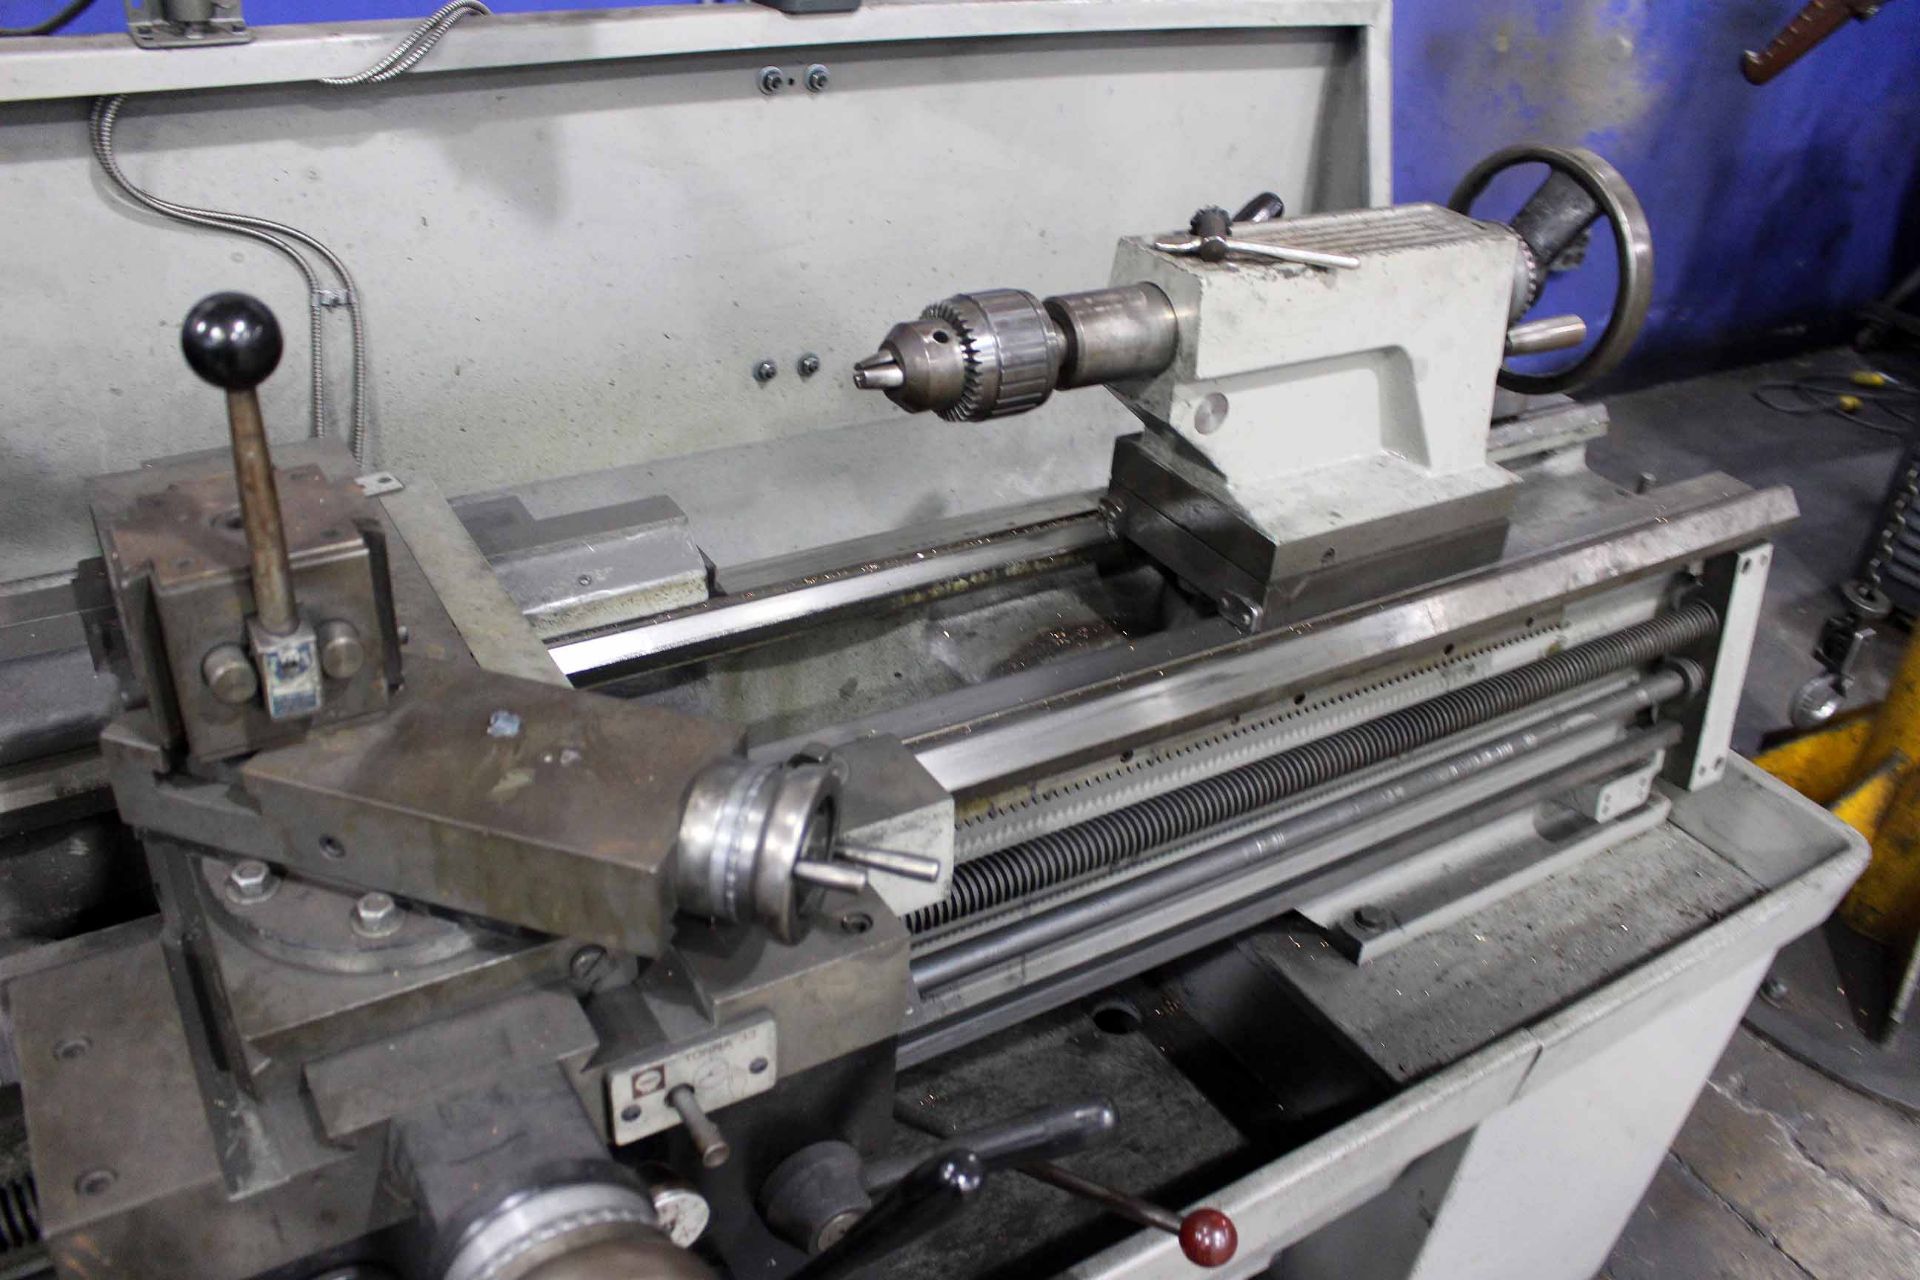 ENGINE LATHE, CLAUSING COLCHESTER 15" X 50", spds: 25-2000 RPM, 2-1/2" spdl. hole, taper attach., - Image 2 of 3